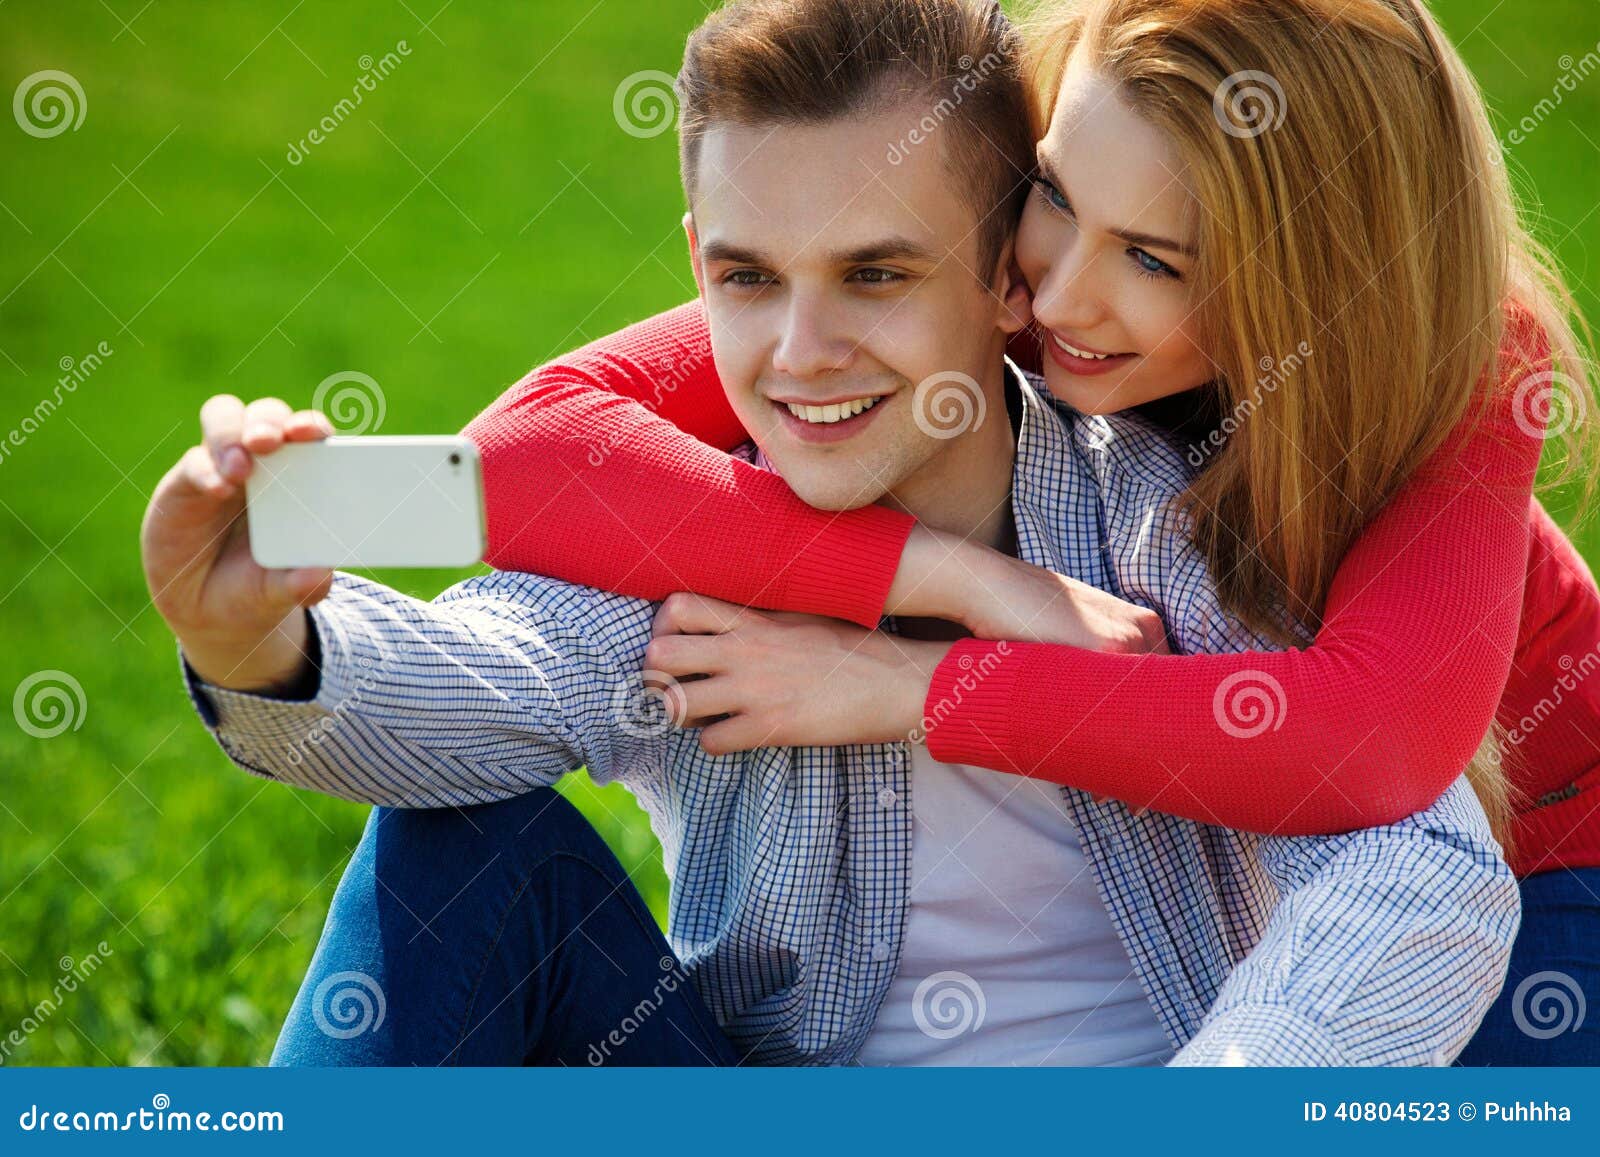 Couples With Phone Taking Selfie Self Portrait At The Park Stock Image